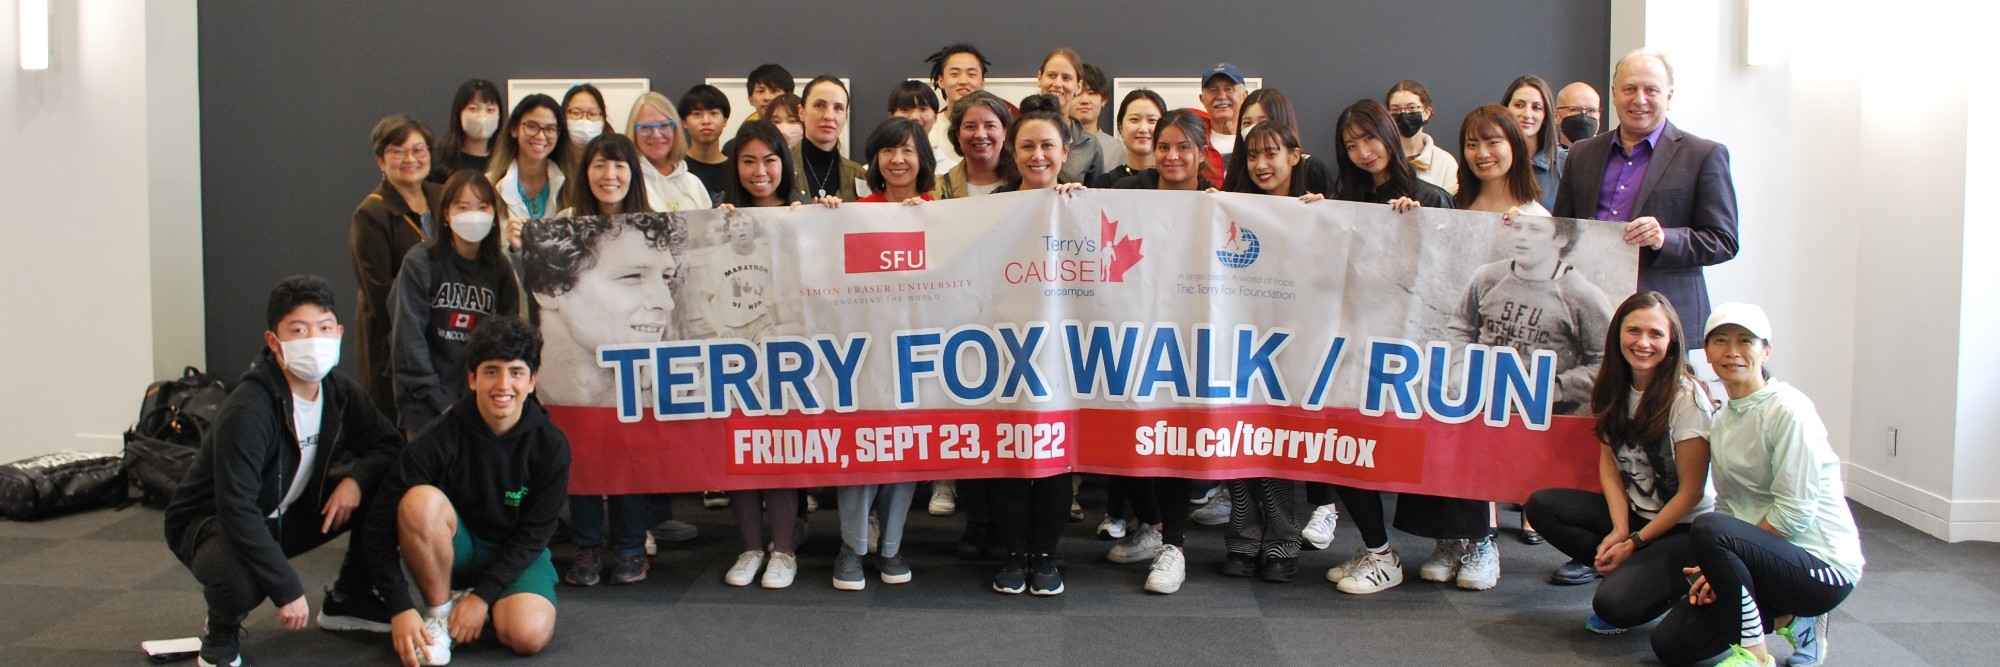 Group of people holding a large banner at 2022 Vancouver campus Terry Fox Walk/ Run 